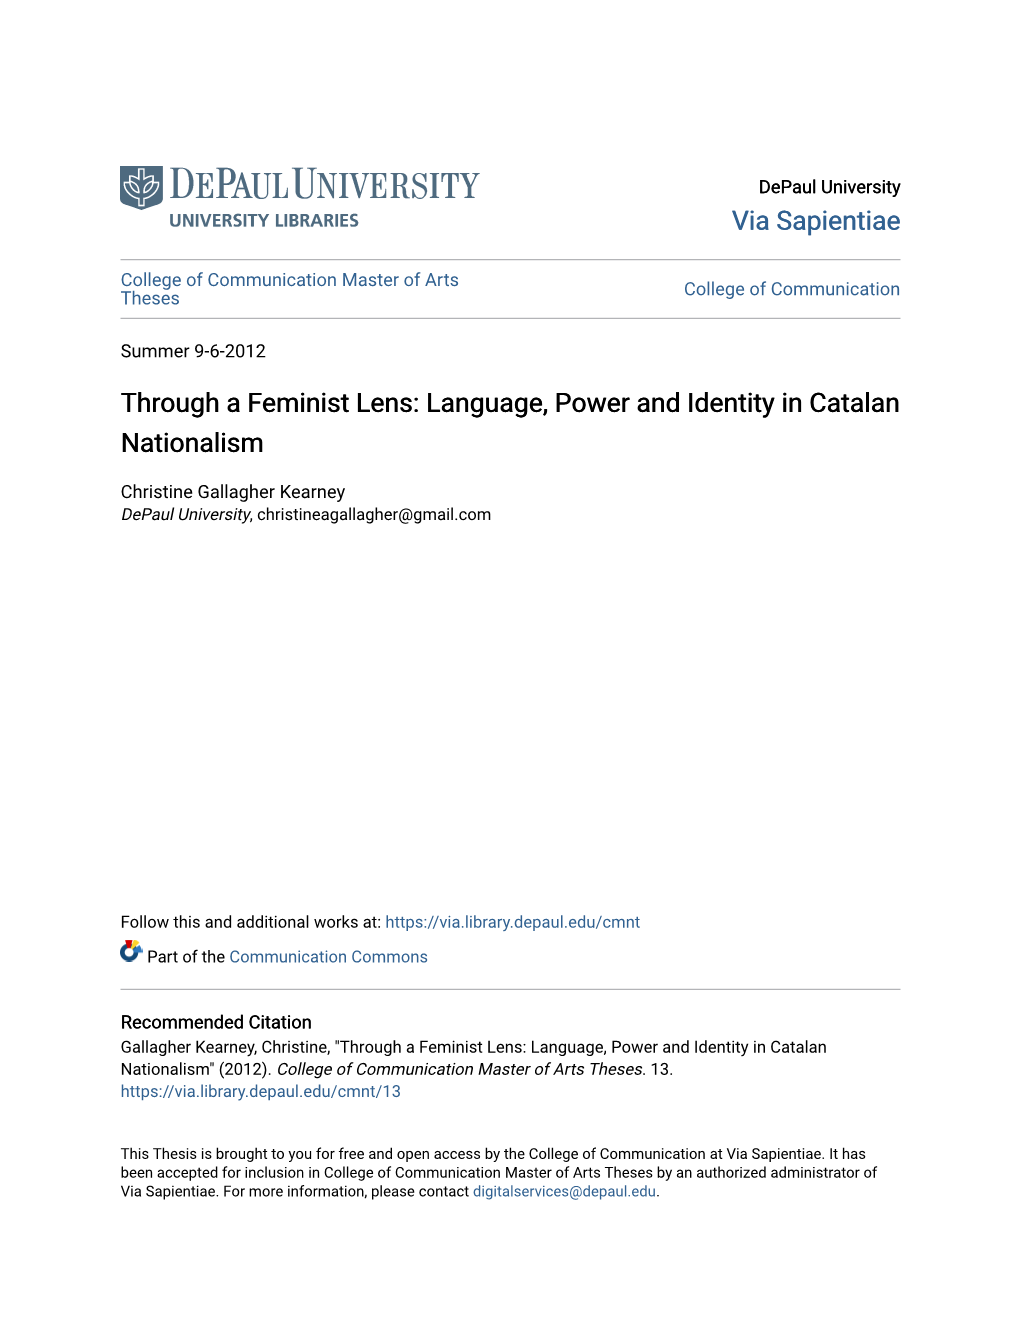 Through a Feminist Lens: Language, Power and Identity in Catalan Nationalism